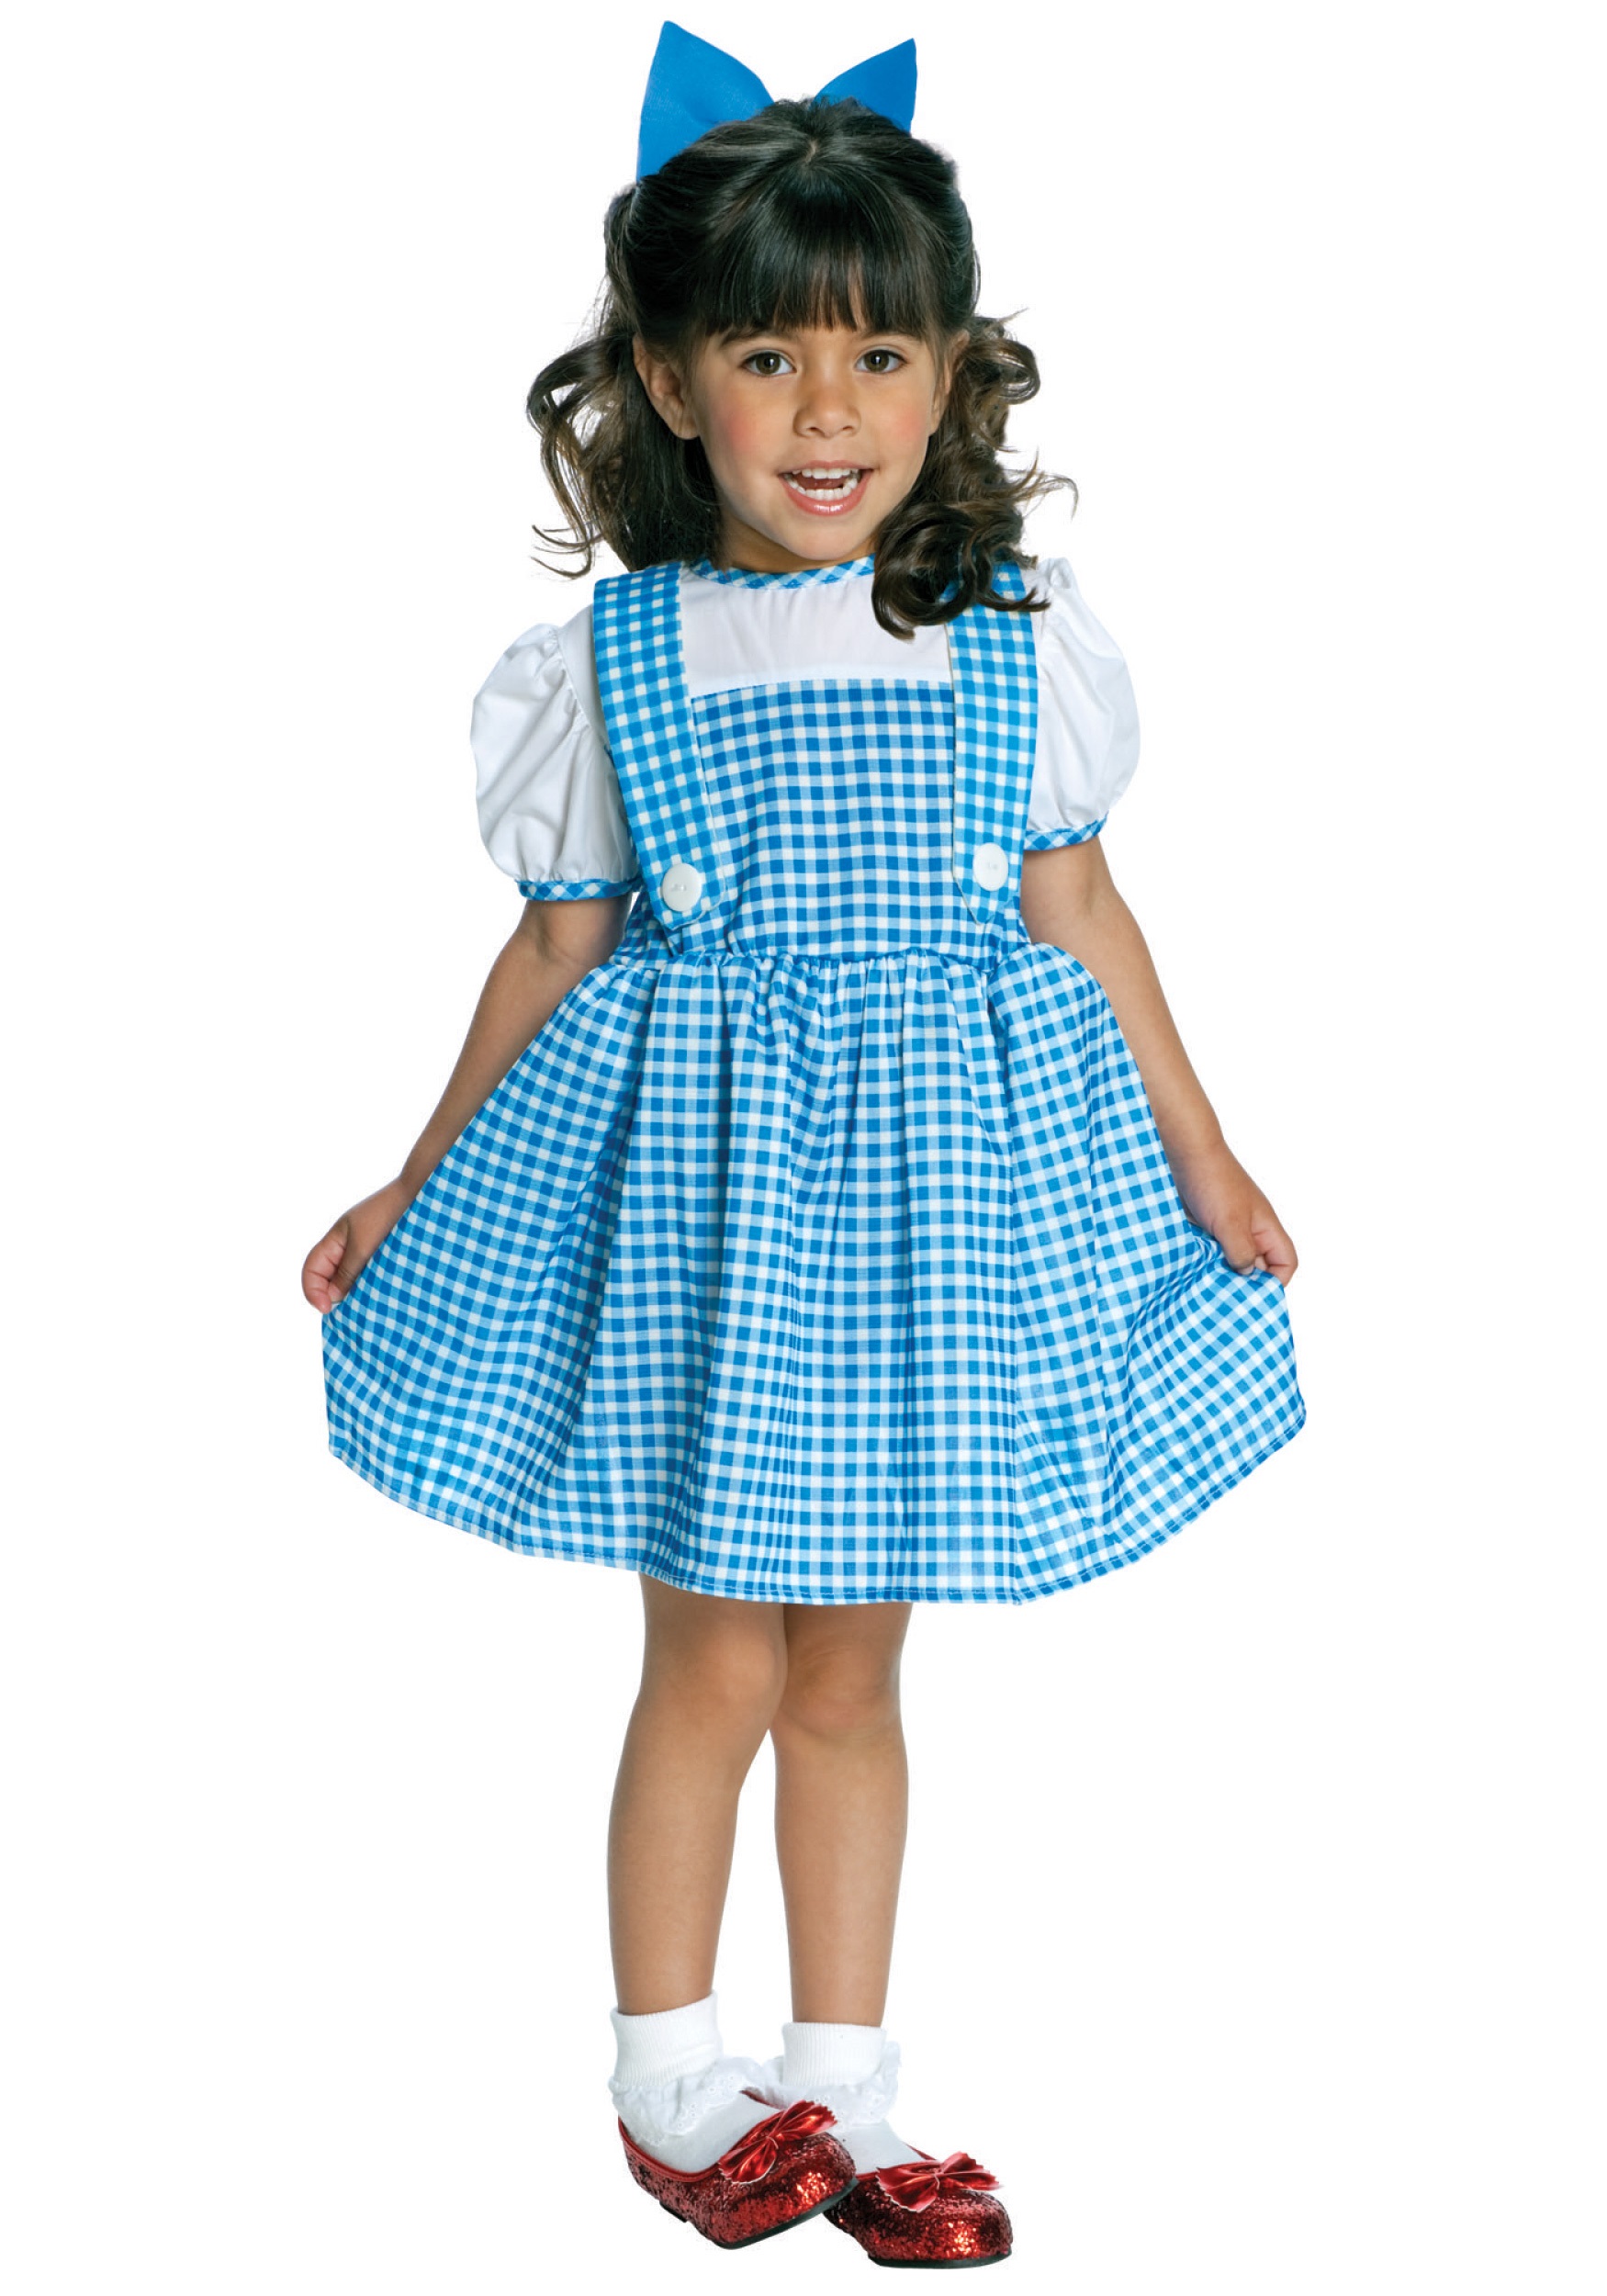 Photos - Fancy Dress Rubies Costume Co. Inc Girls Dorothy Costume for Toddlers Blue/White R 